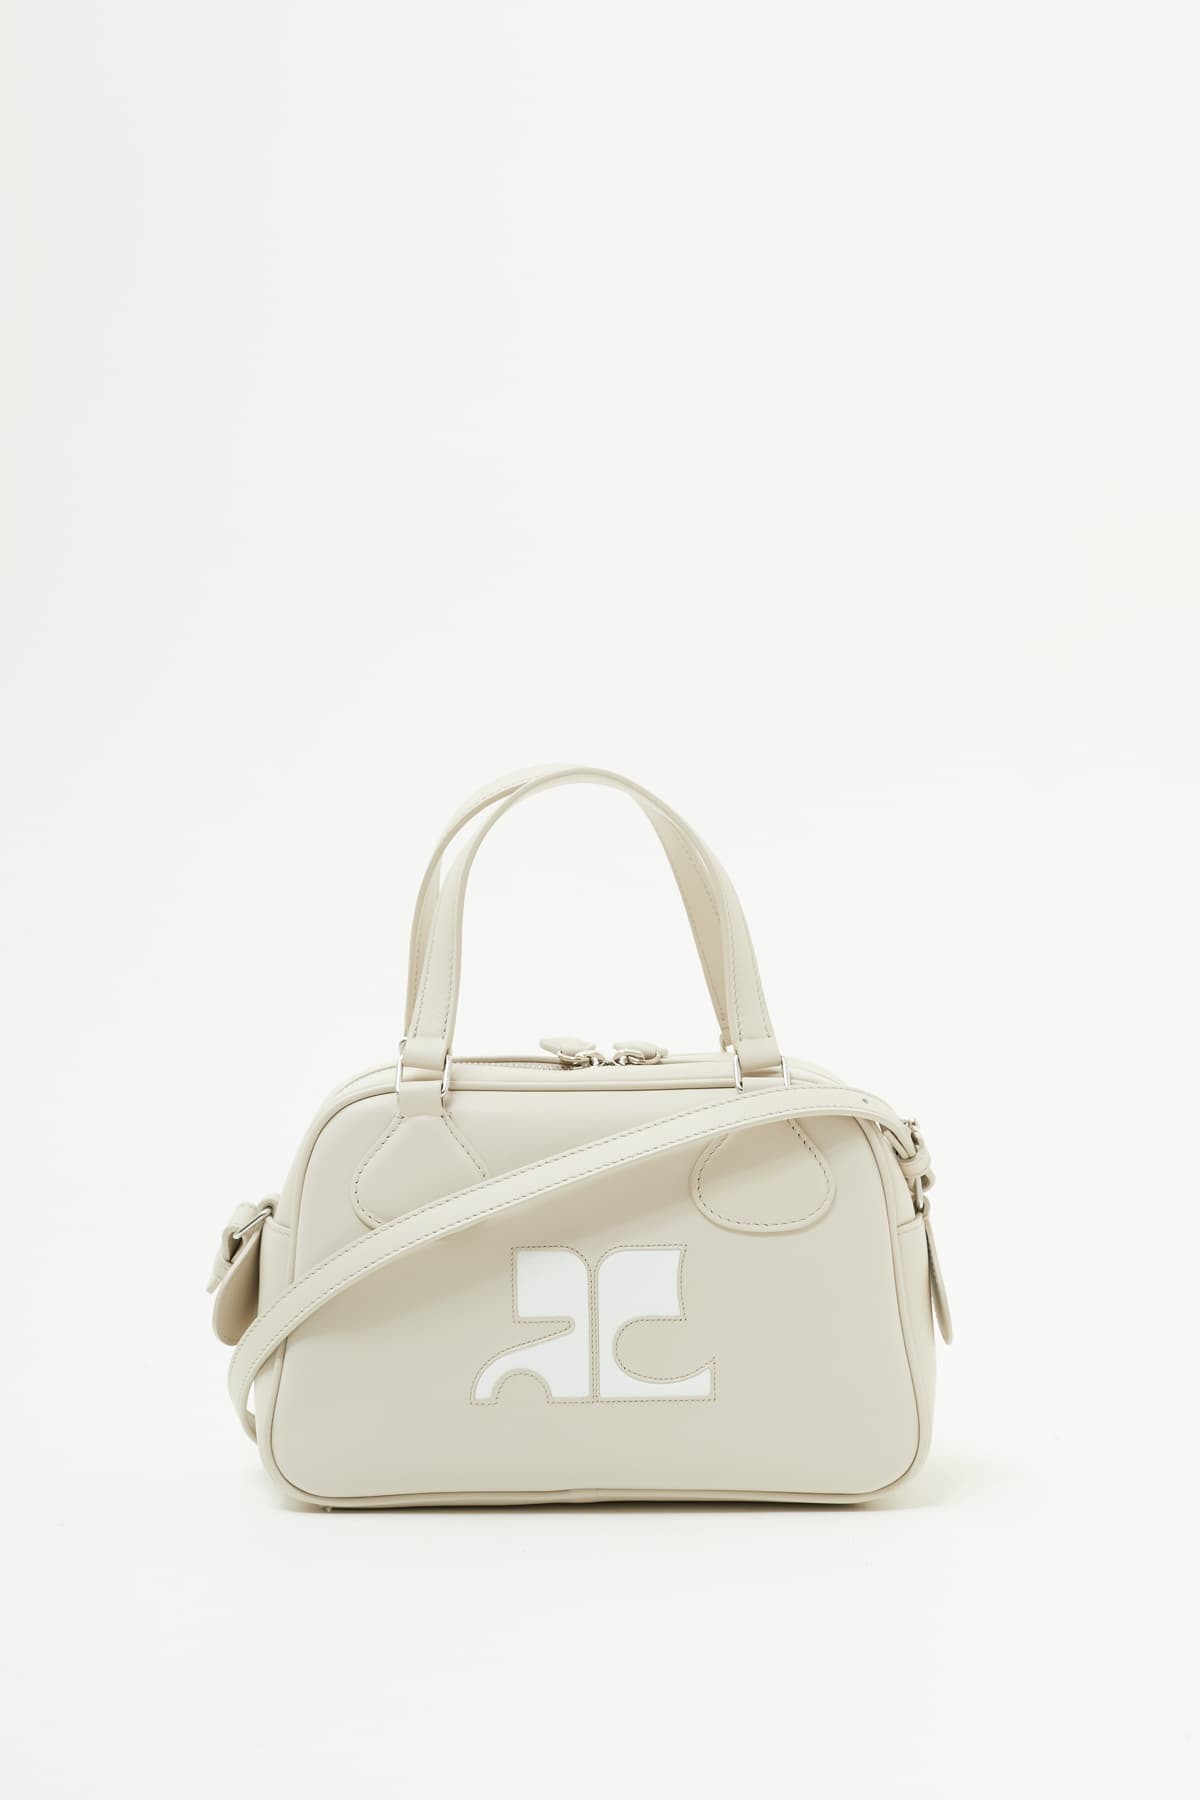 COURREGES MASTIC GREY REEDITION LEATHER BOWLING BAG IAMNUE